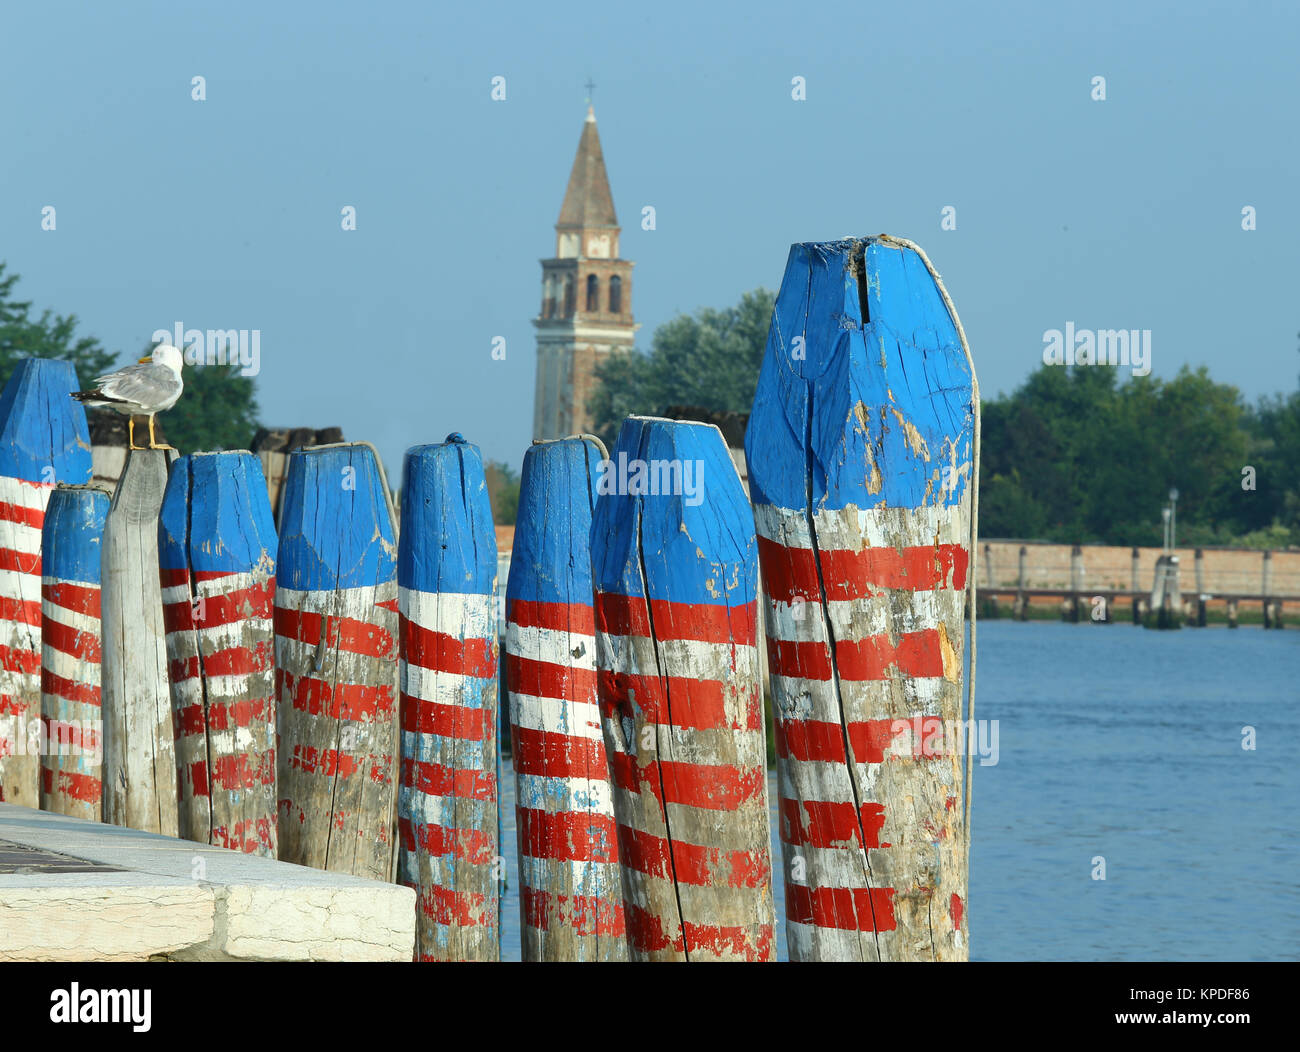 poles to moor the boat called bricole in italian language Stock Photo